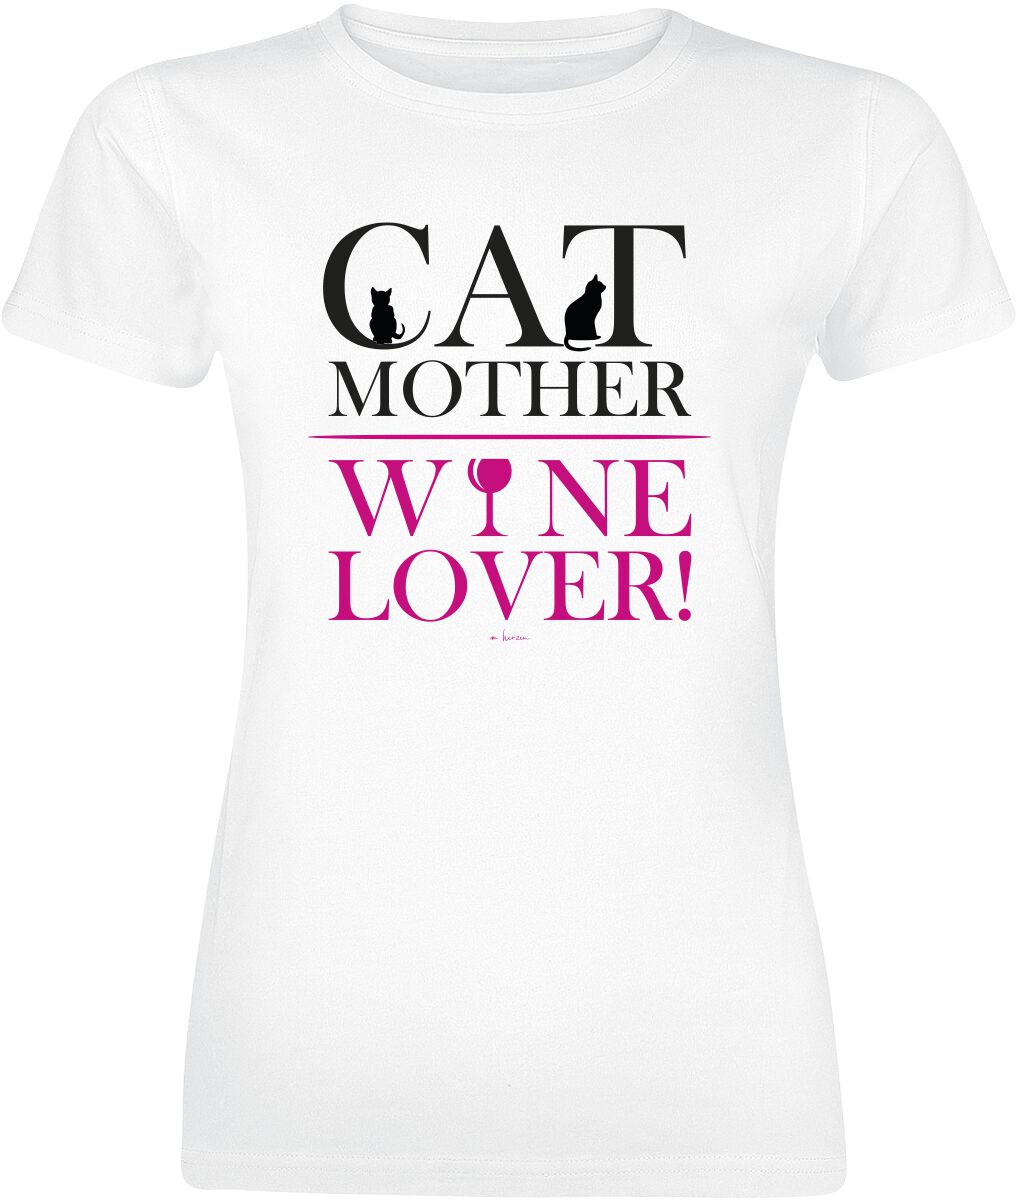 Alcohol & Party Cat Mother - Wine Lover T-Shirt white